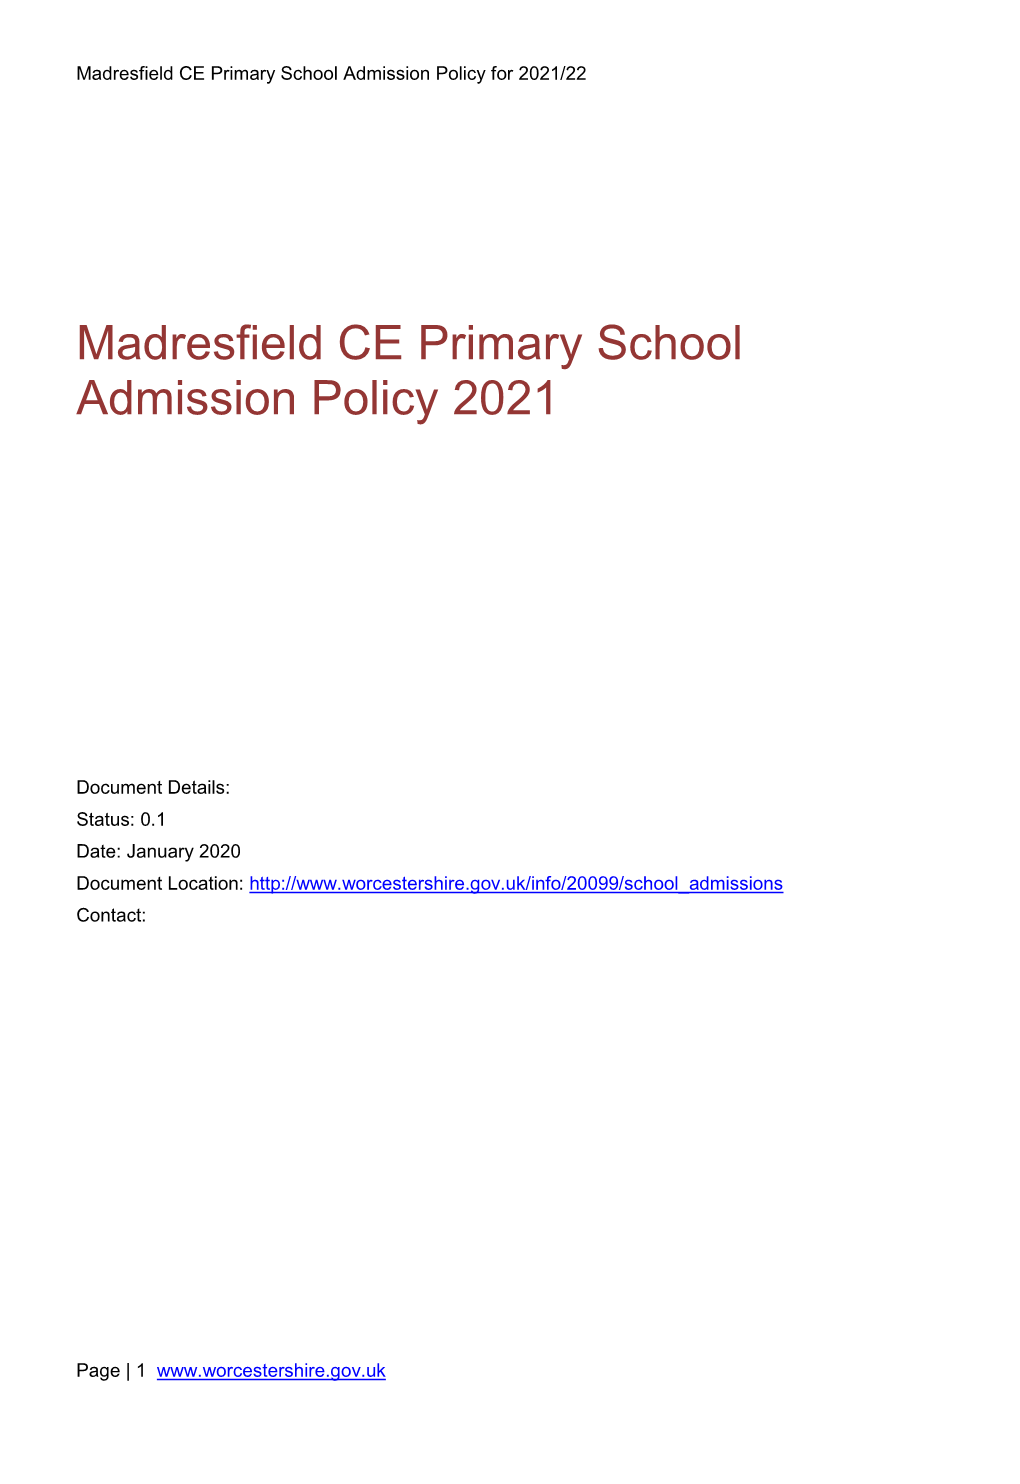 Madresfield CE Primary Admission Policy 2021